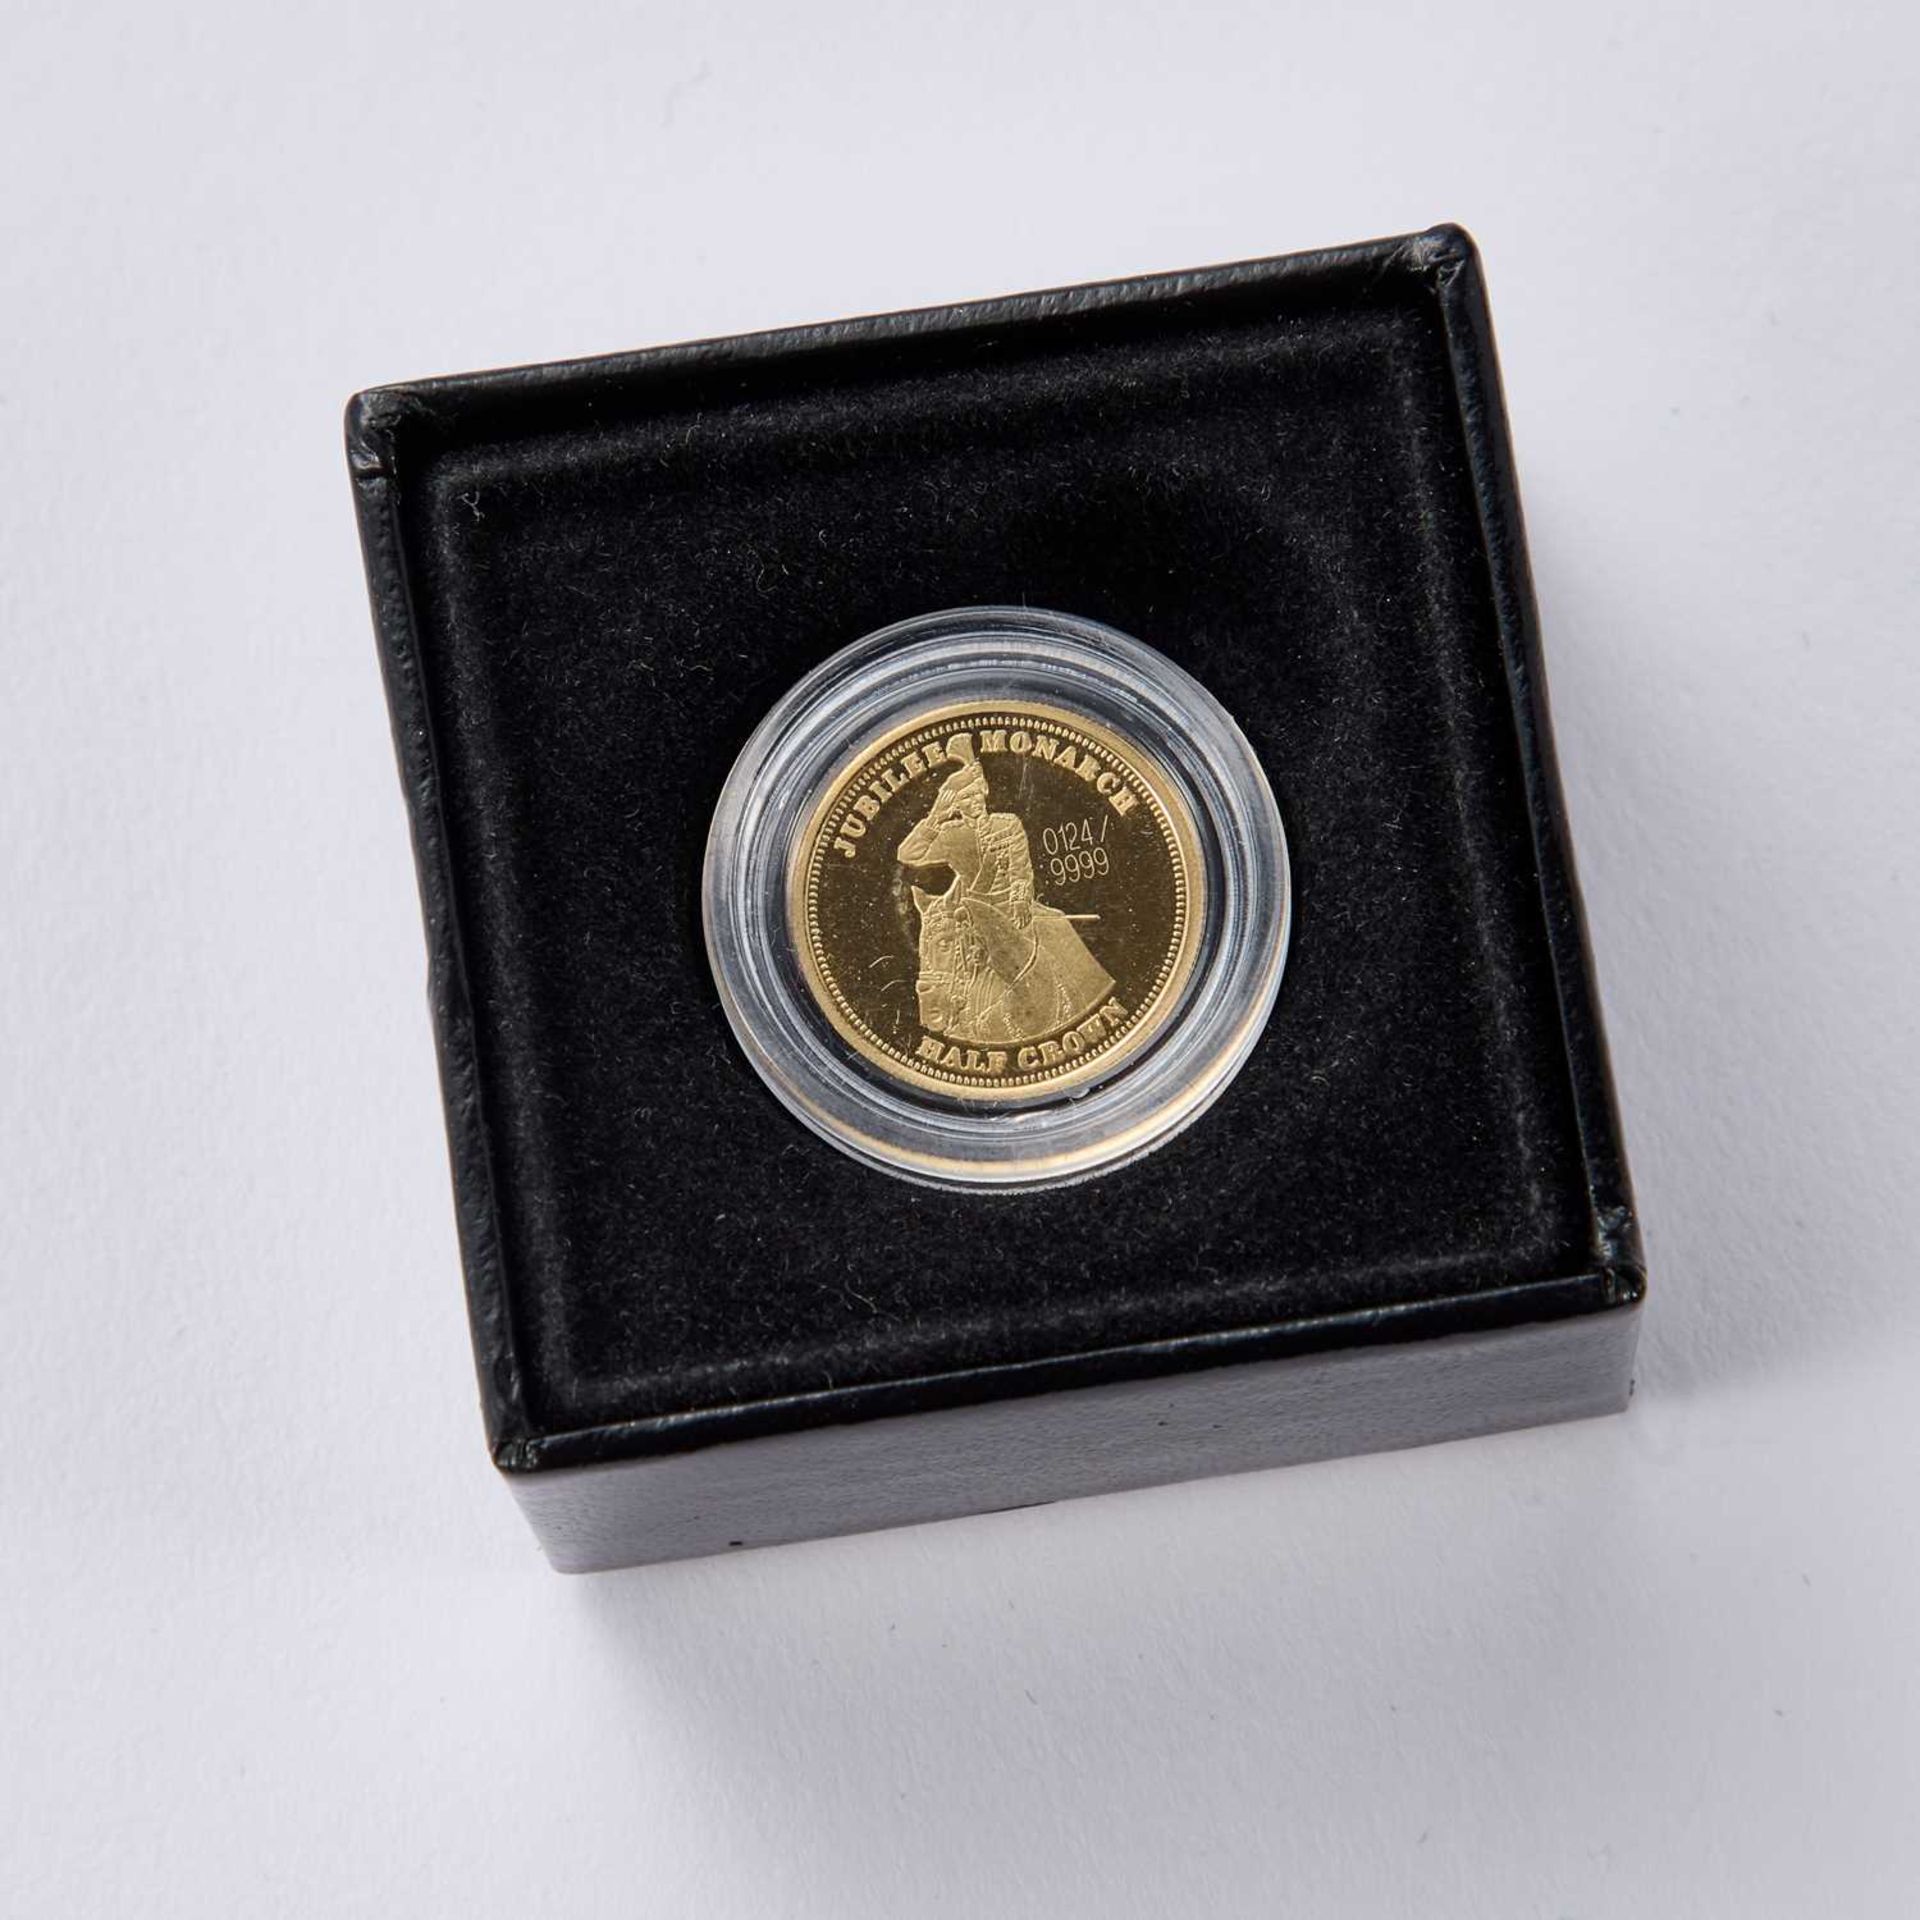 THE LONDON MINT OFFICE, THE ROYAL HOUSE OF WINDSOR GOLD COIN COLLECTION - Image 5 of 6